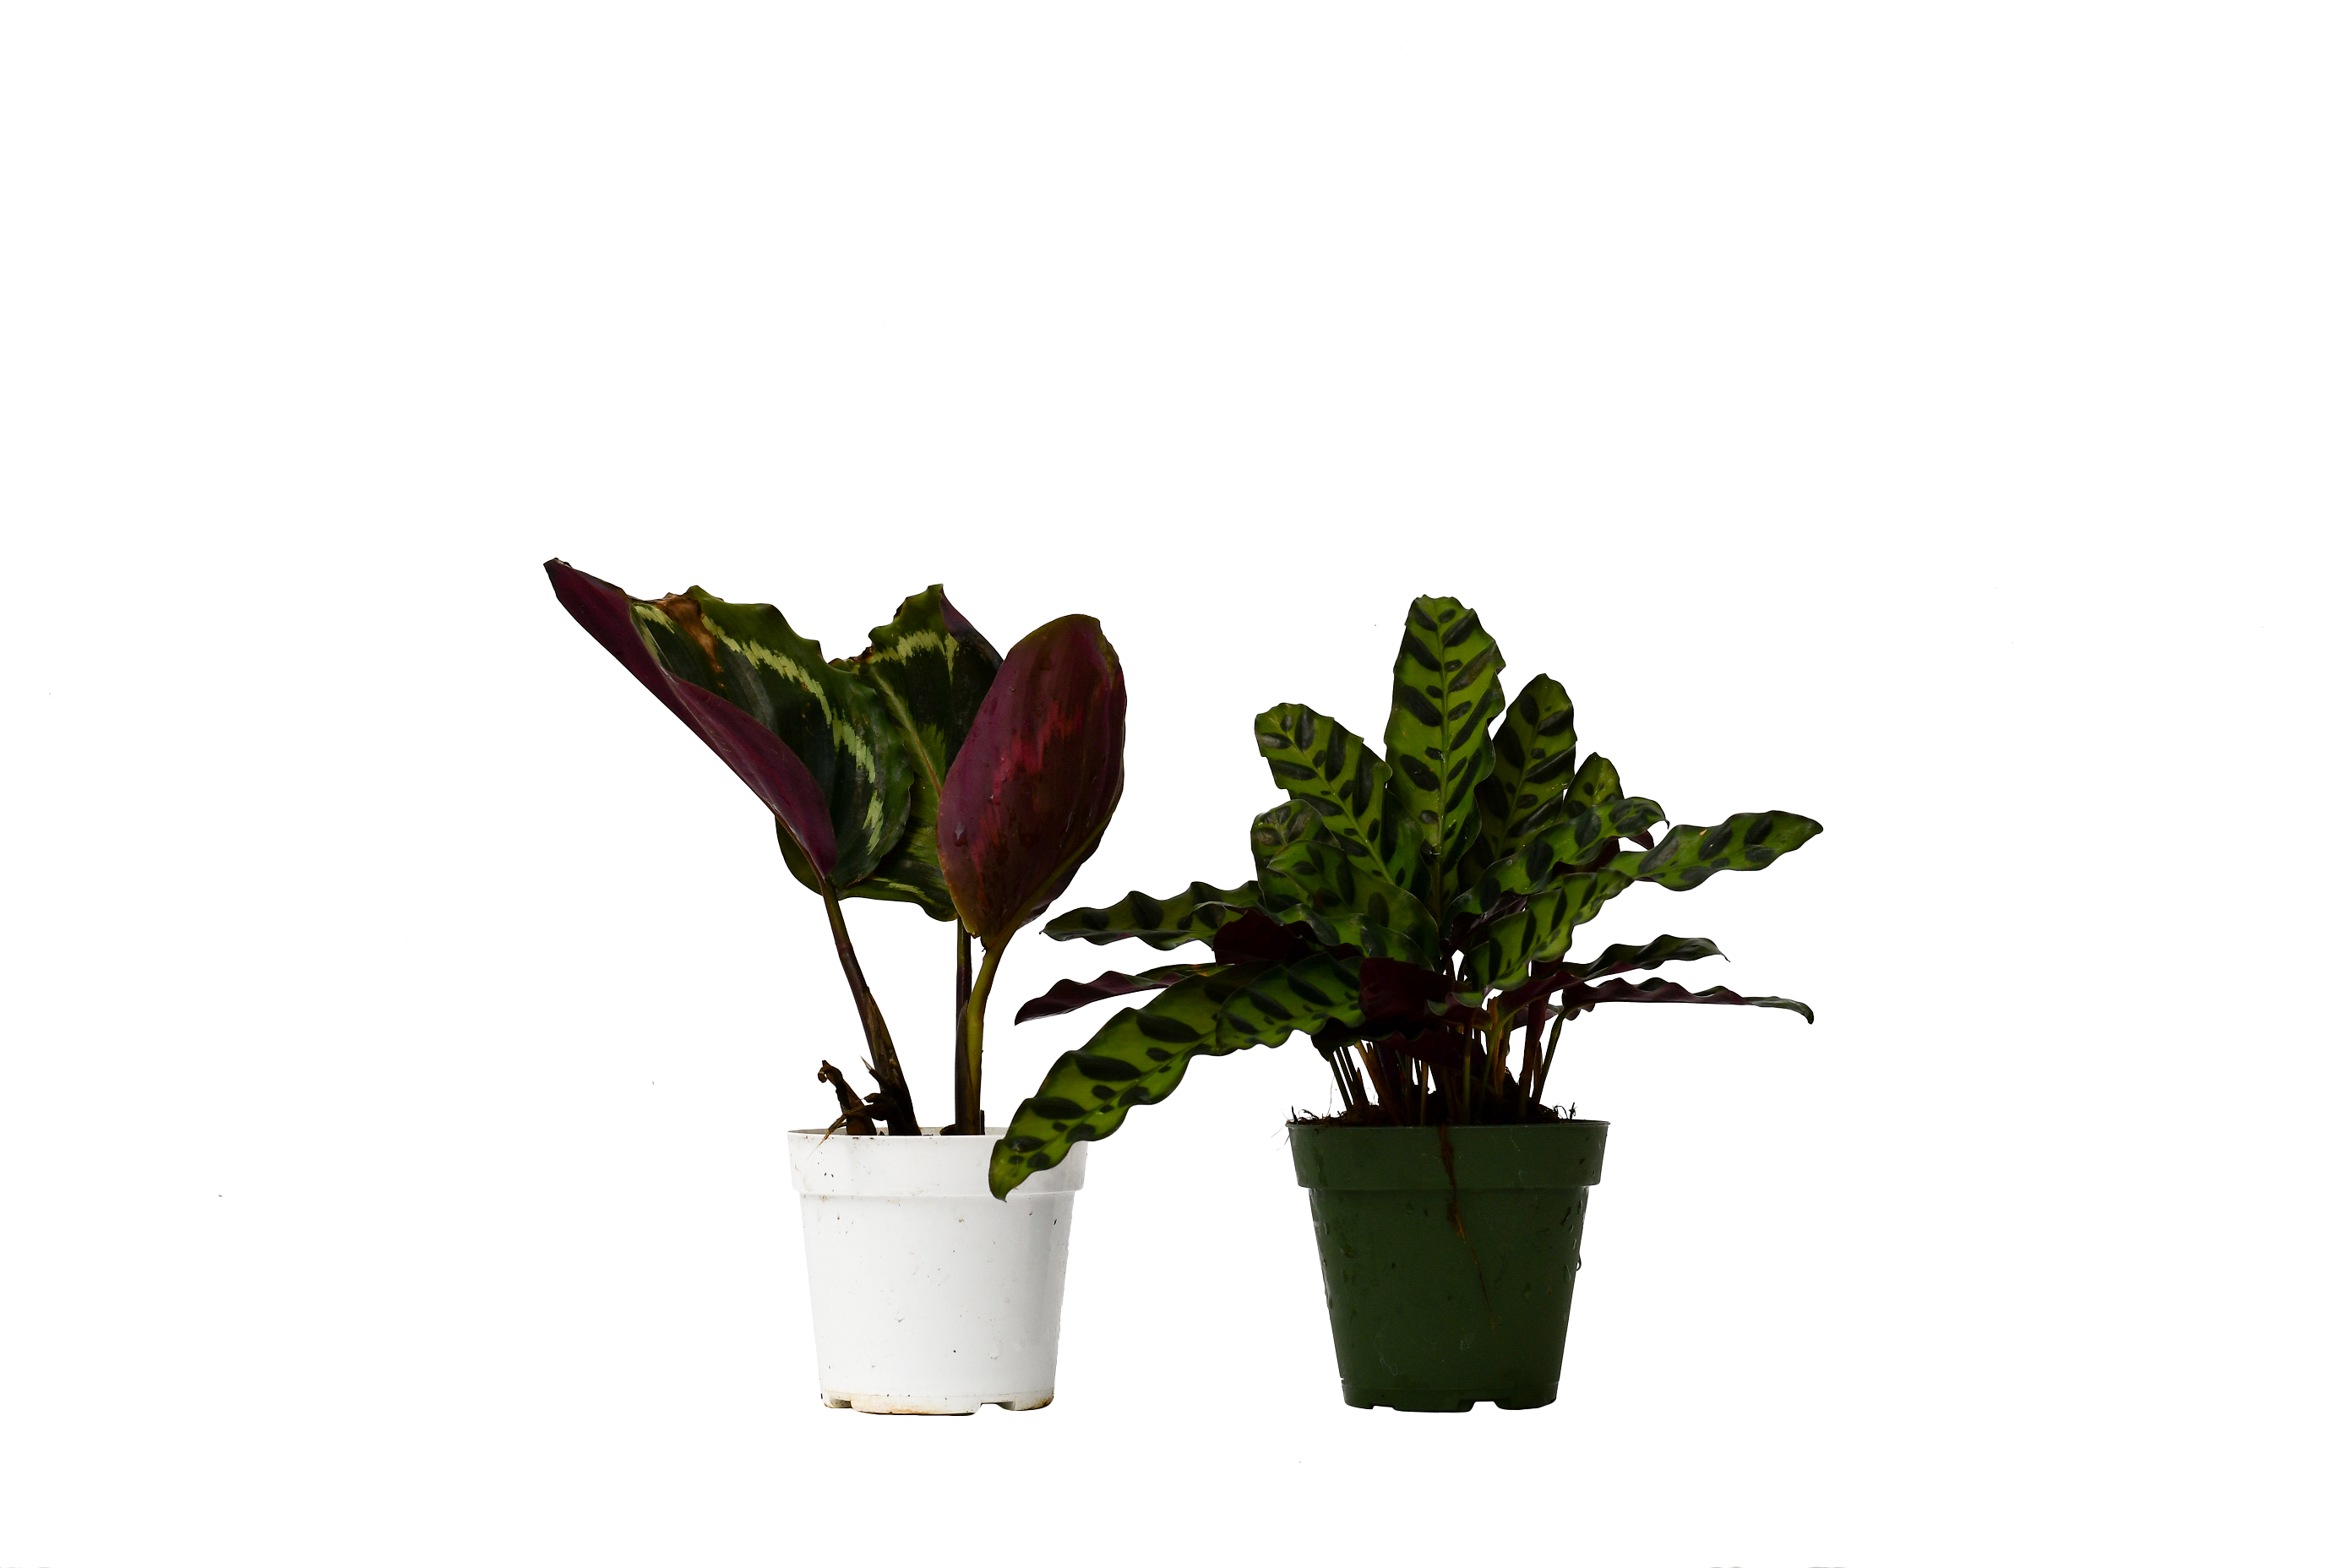 Two potted plants on a white background in the best garden center near me.